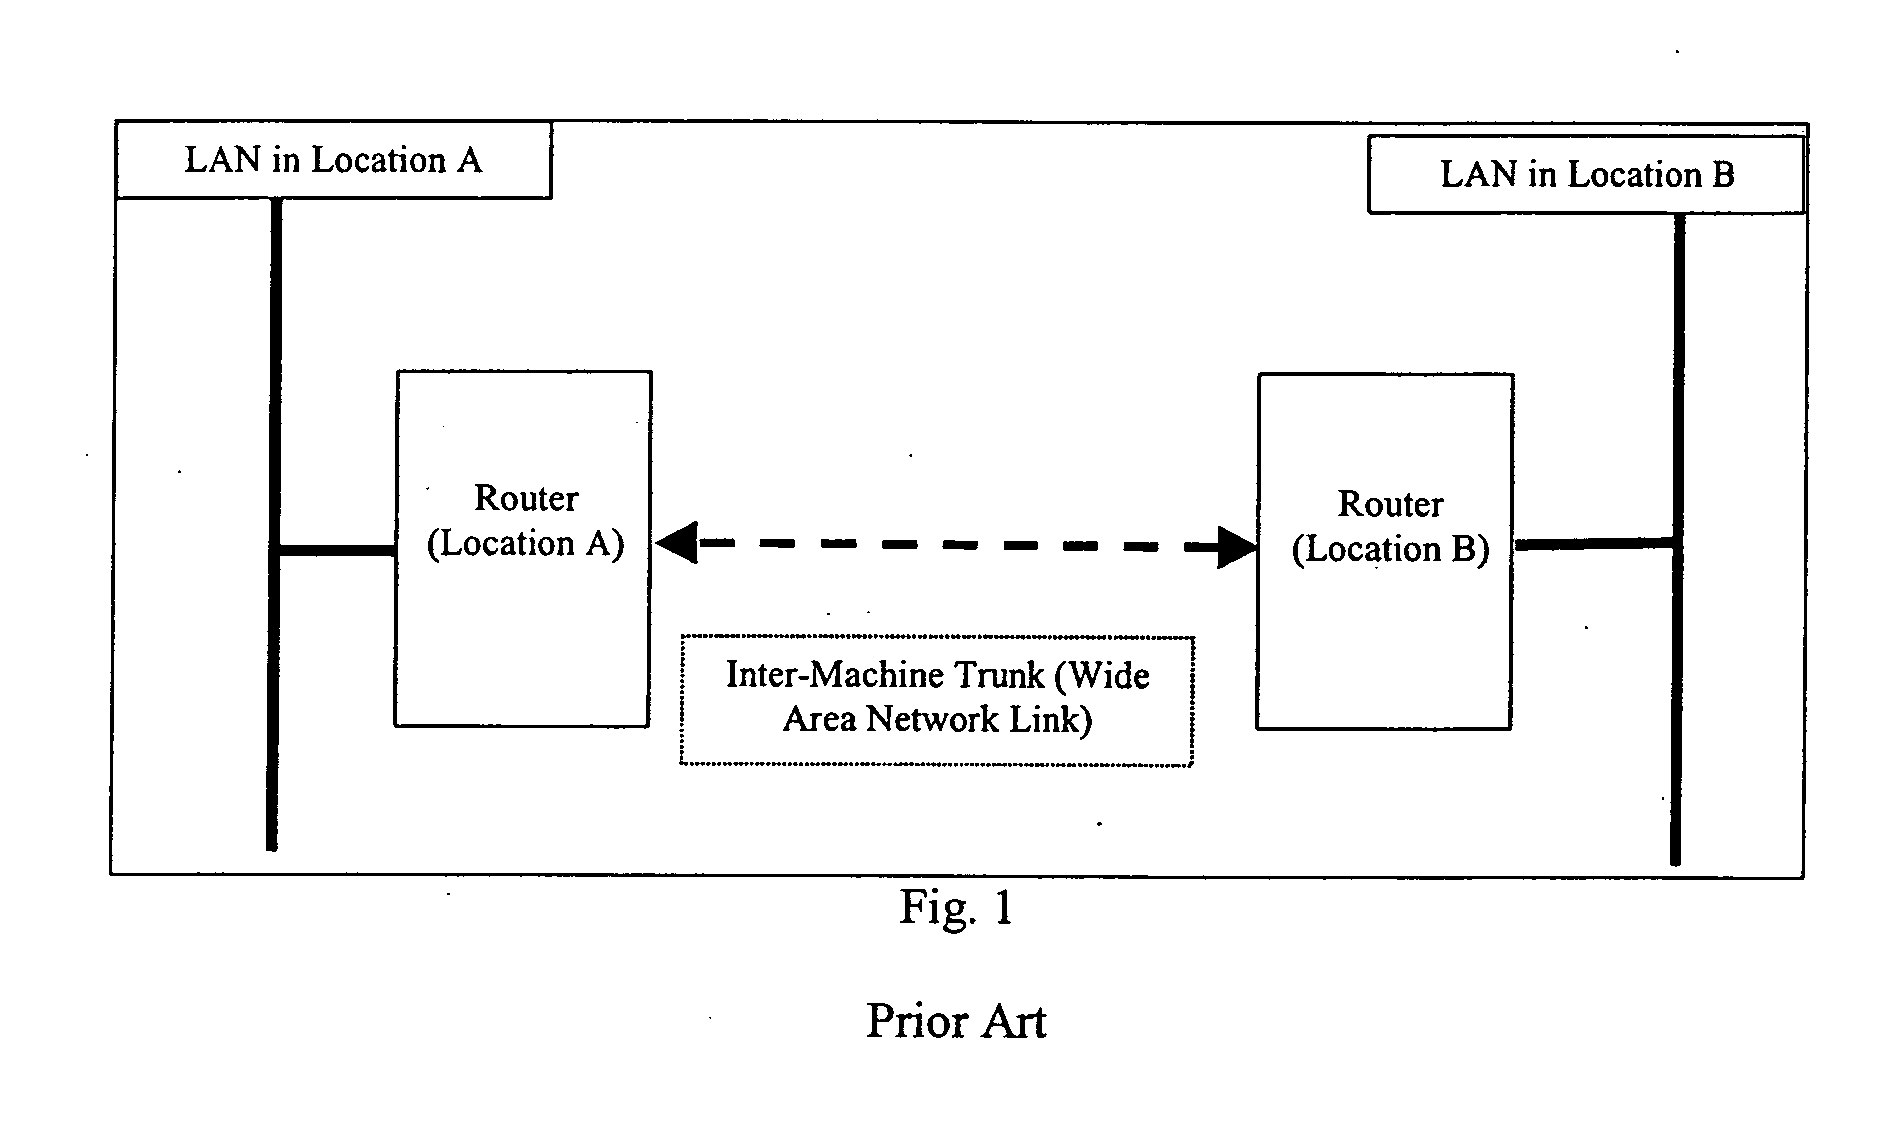 Multiple transmission bandwidth streams with differentiated quality of service